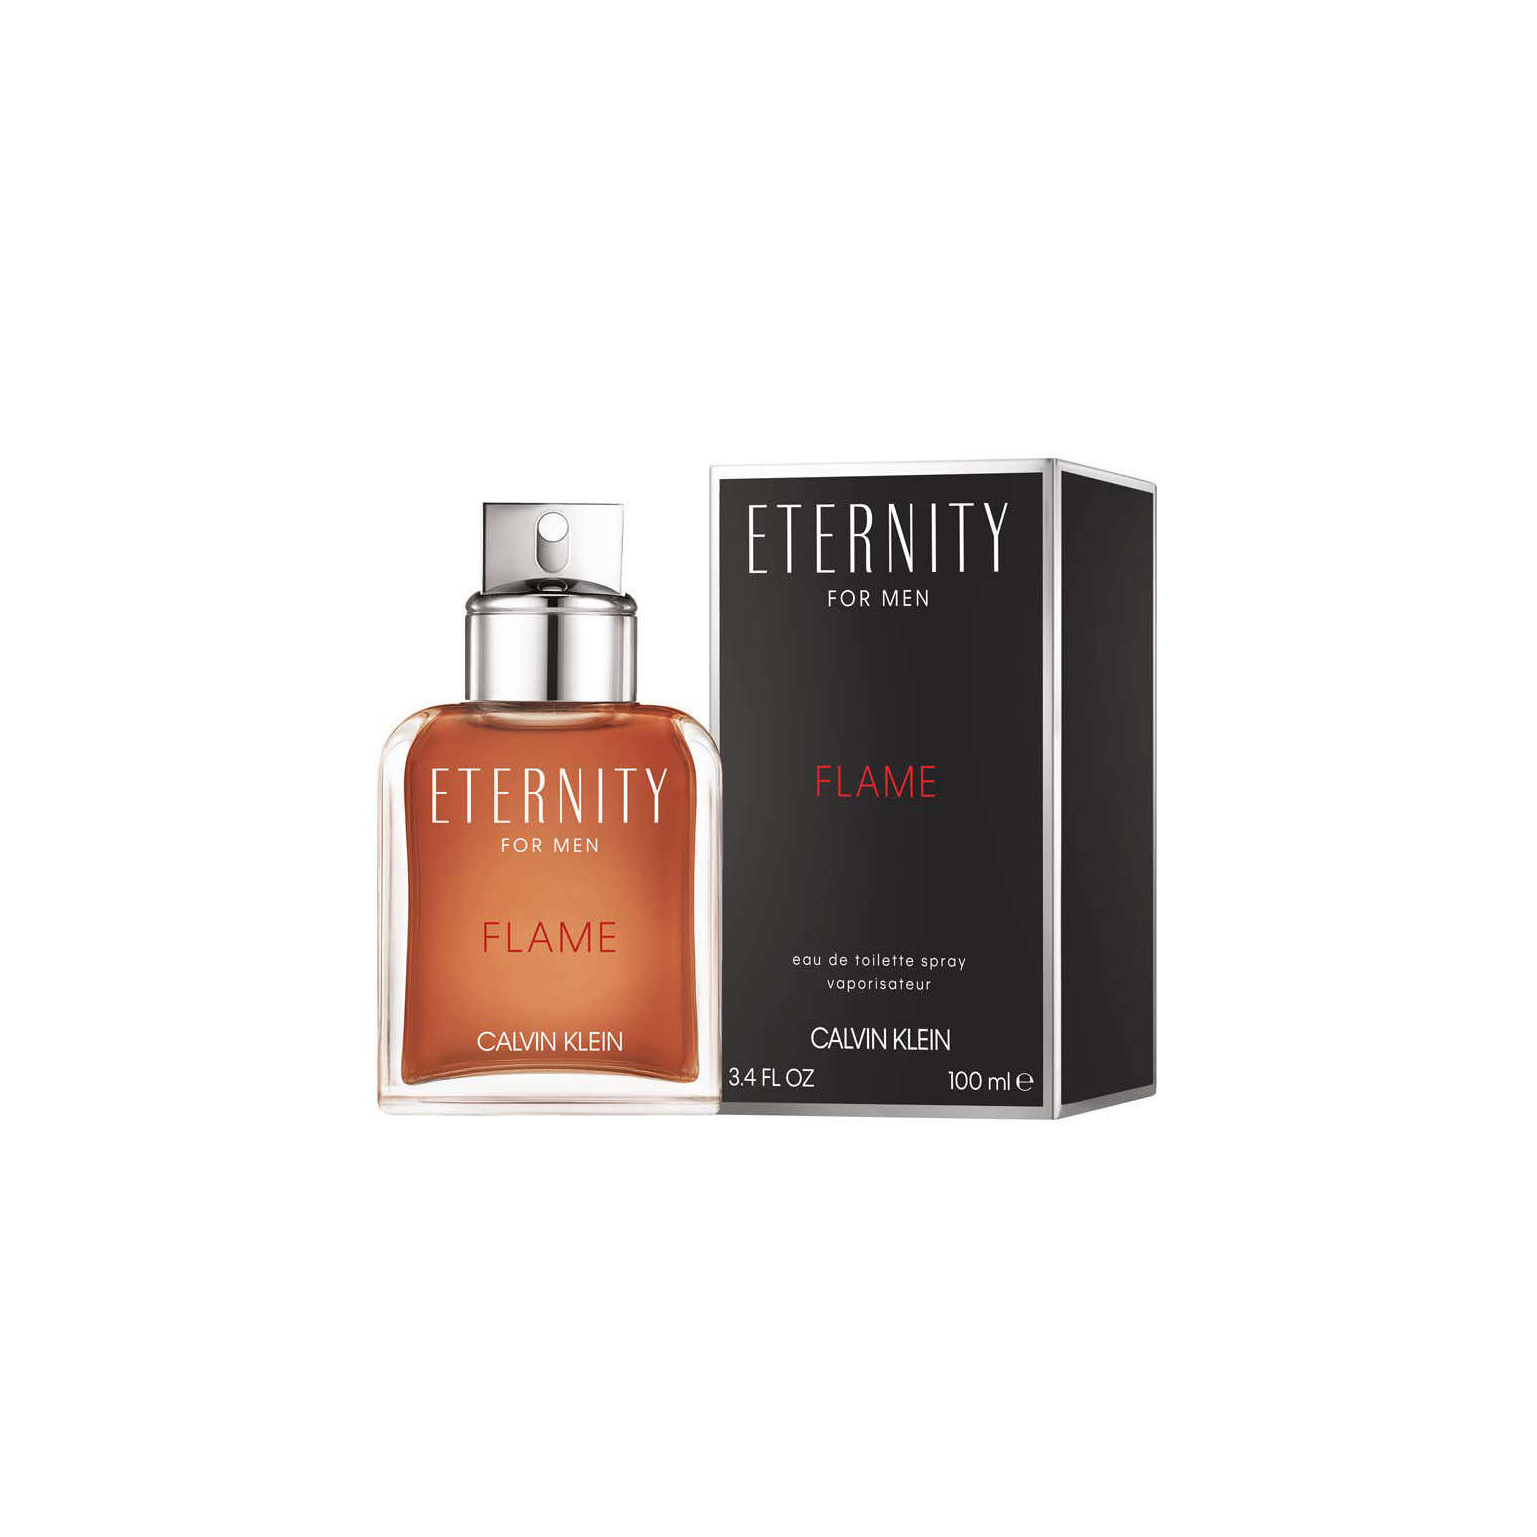 Eternity Flame by Calvin Klein for Men - 3.4 oz EDT Spray - image 3 of 3